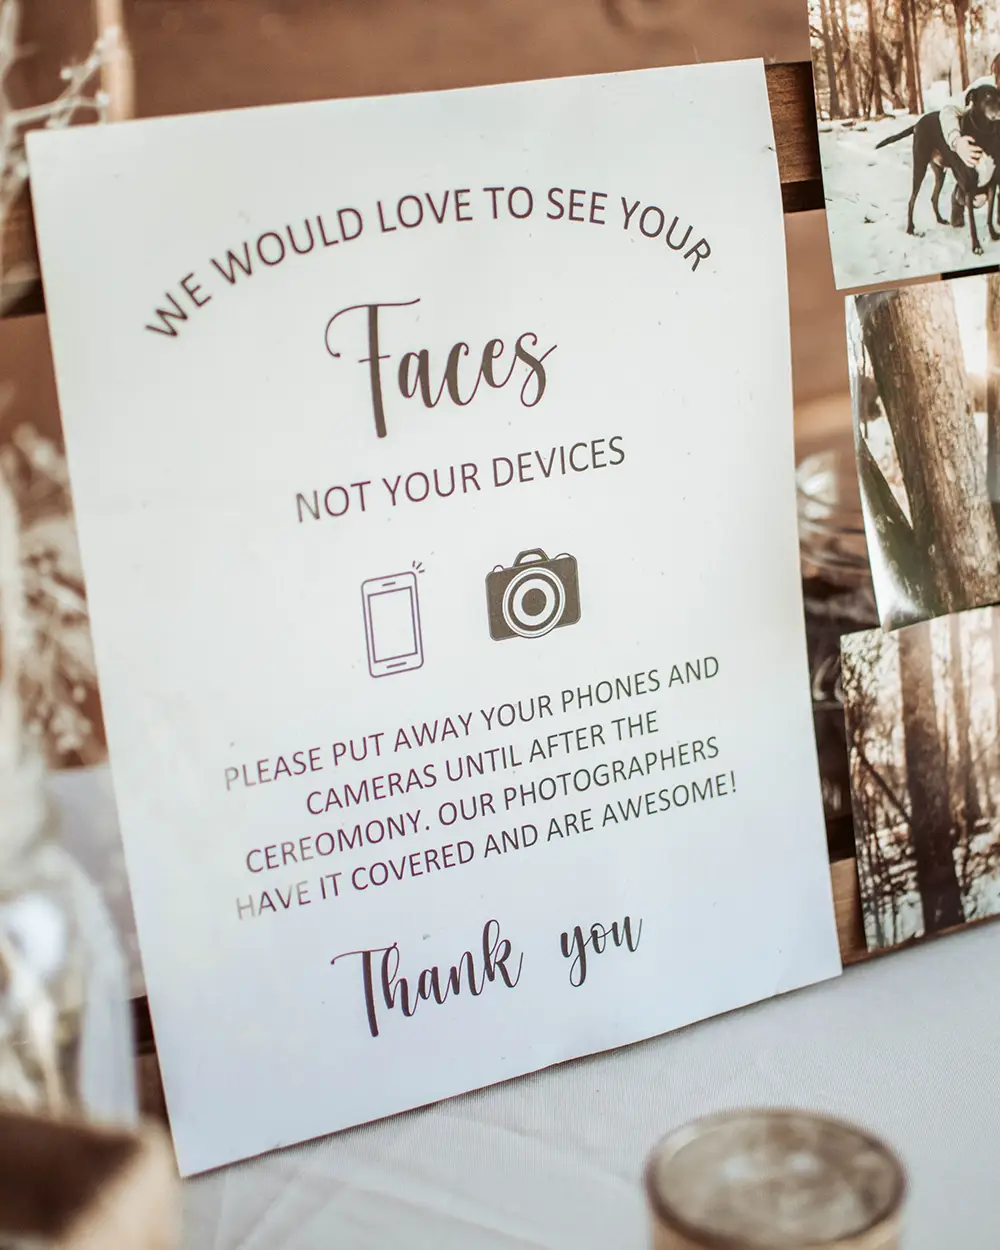 A sign on a table at a wedding reception, reading 